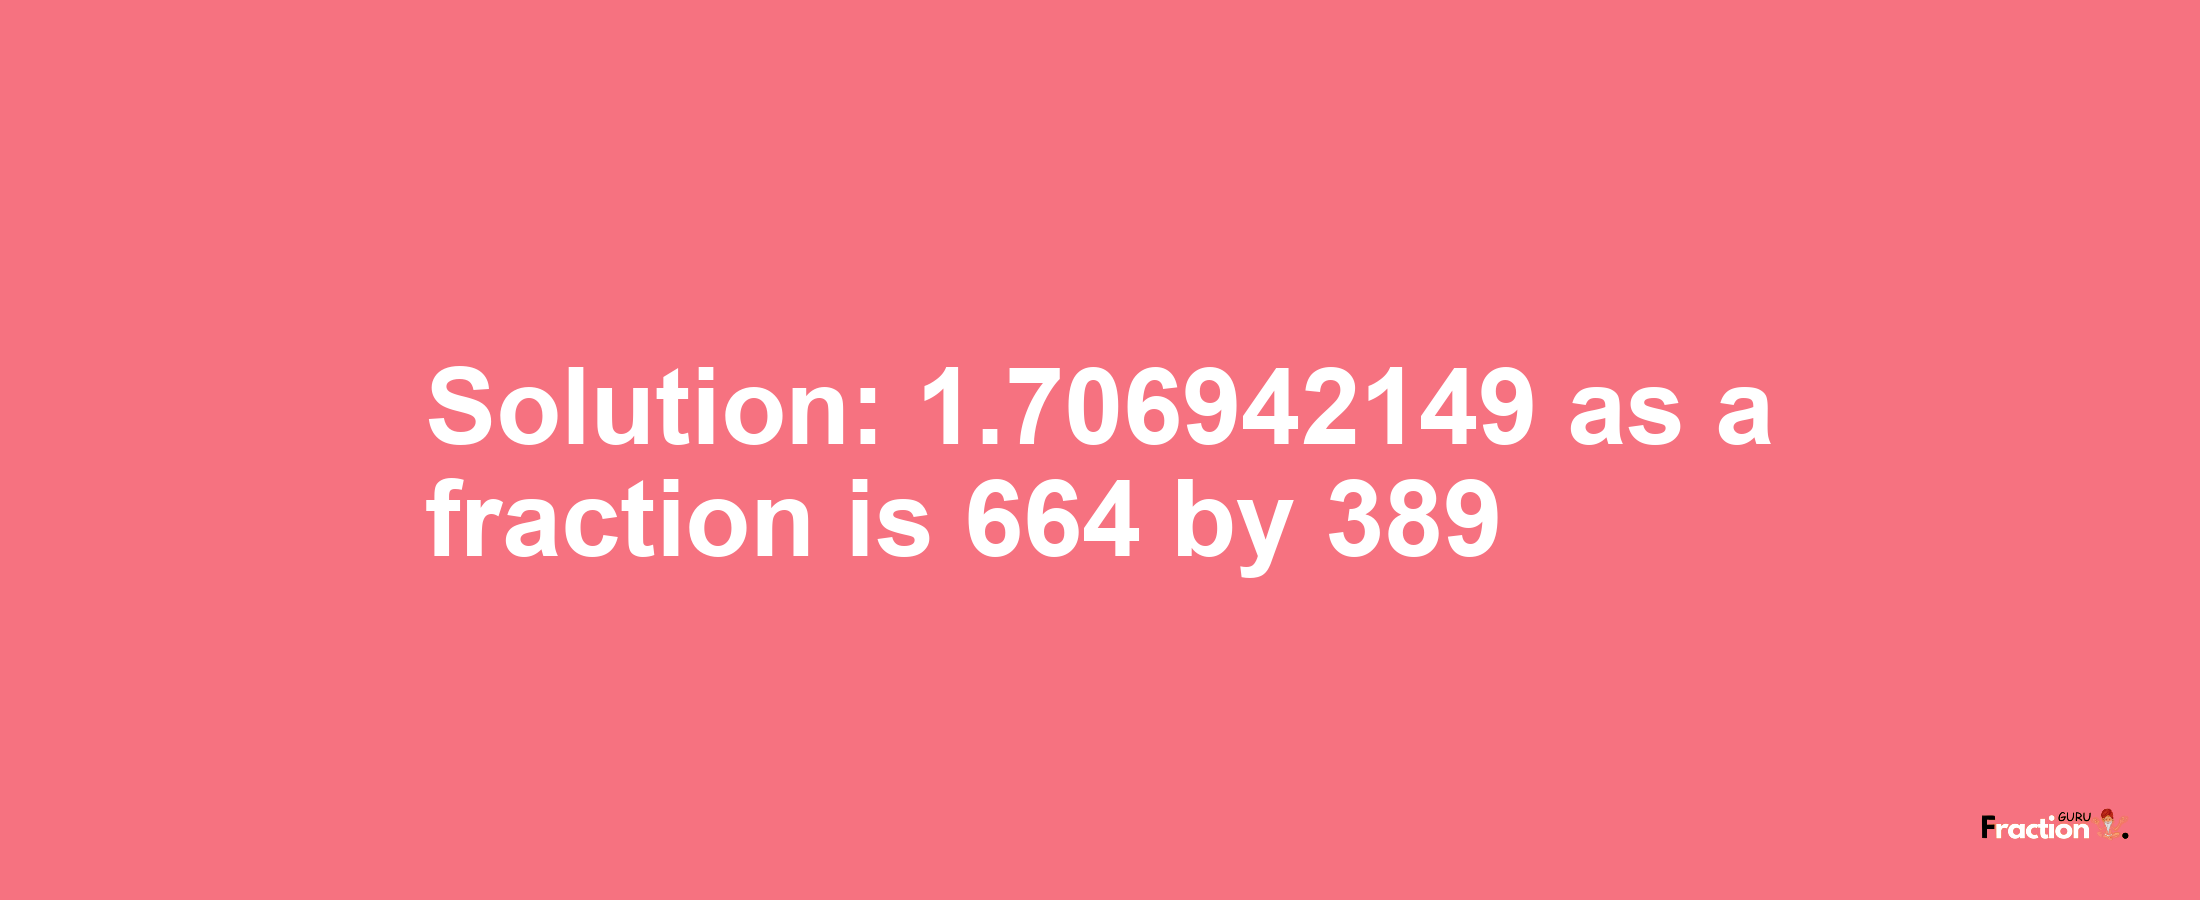 Solution:1.706942149 as a fraction is 664/389